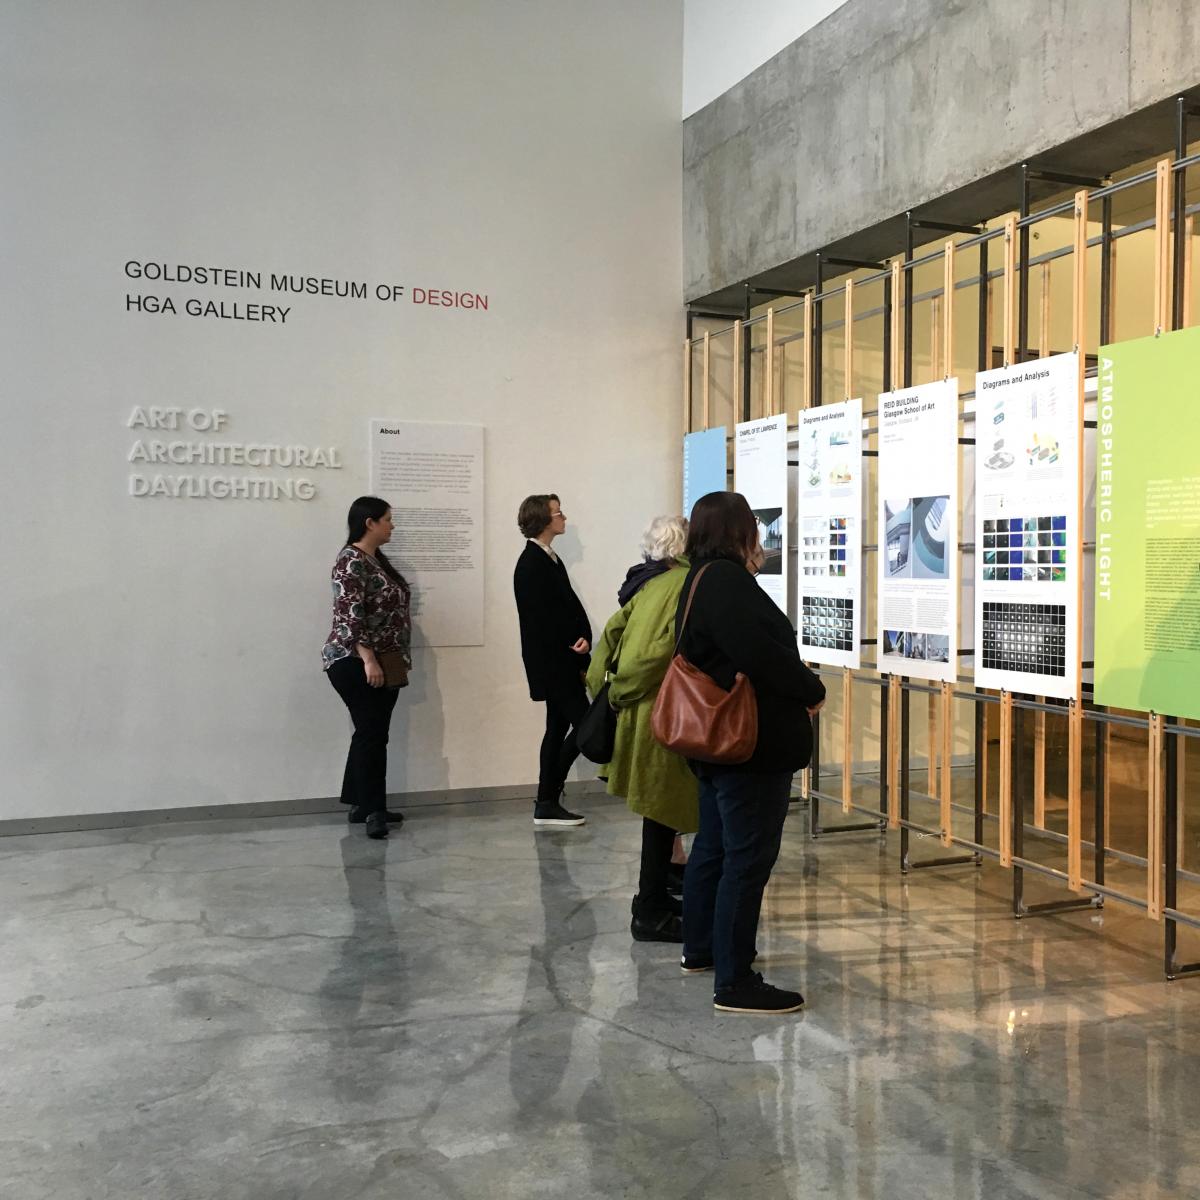 Art of Architectural Daylighting exhibition boards in HGA gallery with four people viewing them